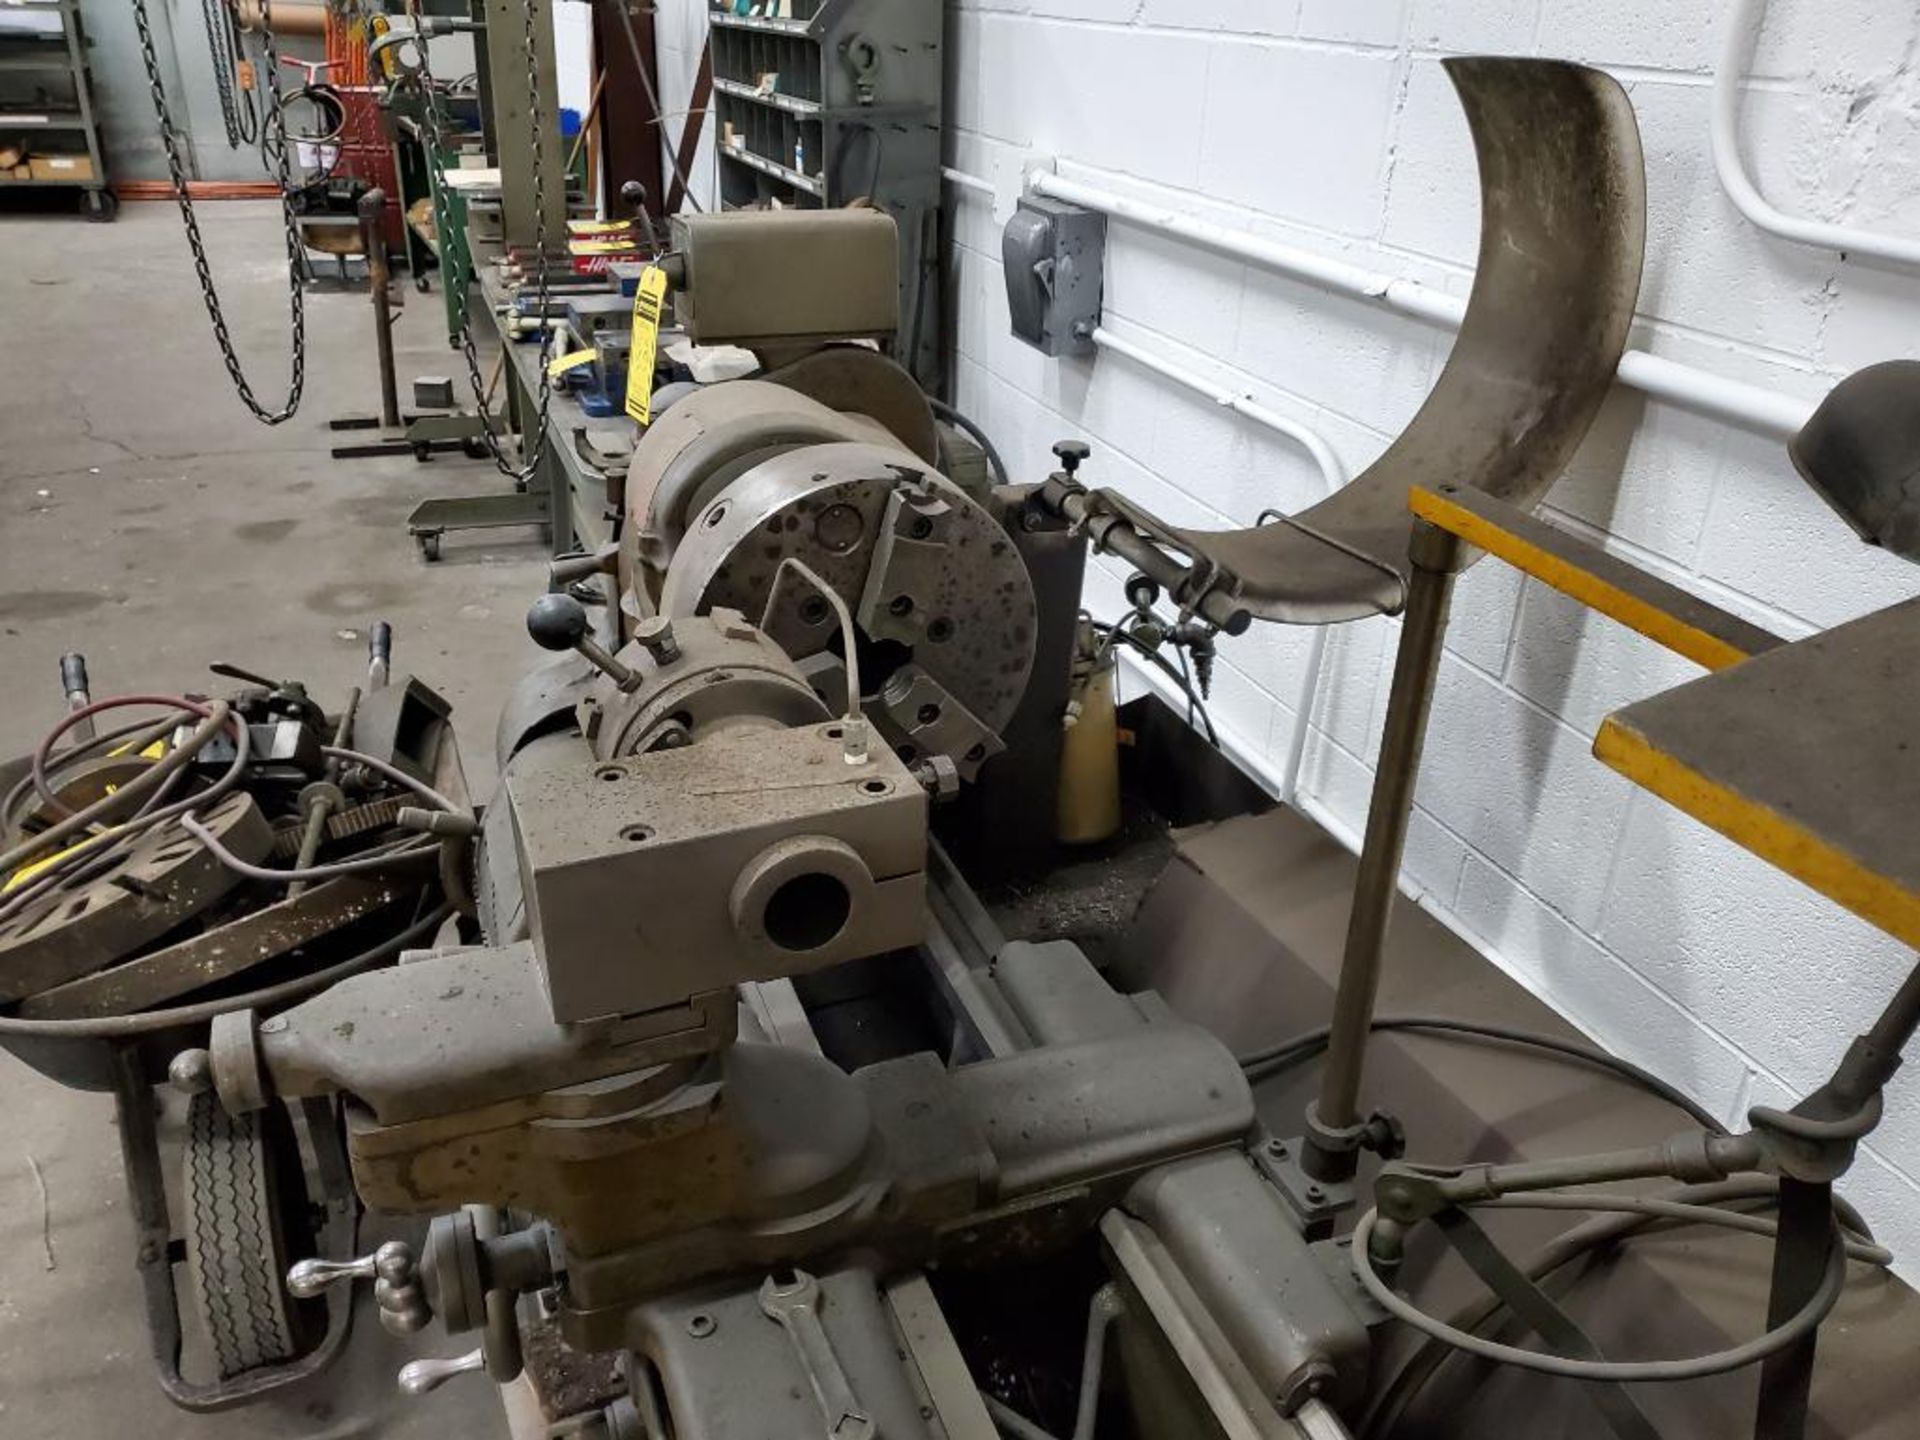 South Bend Horizontal Engine Lathe, 8' Gap Bed, 12" 3-Jaw Chuck, Tailstock, Cross Slide, Toolpost w/ - Image 11 of 11